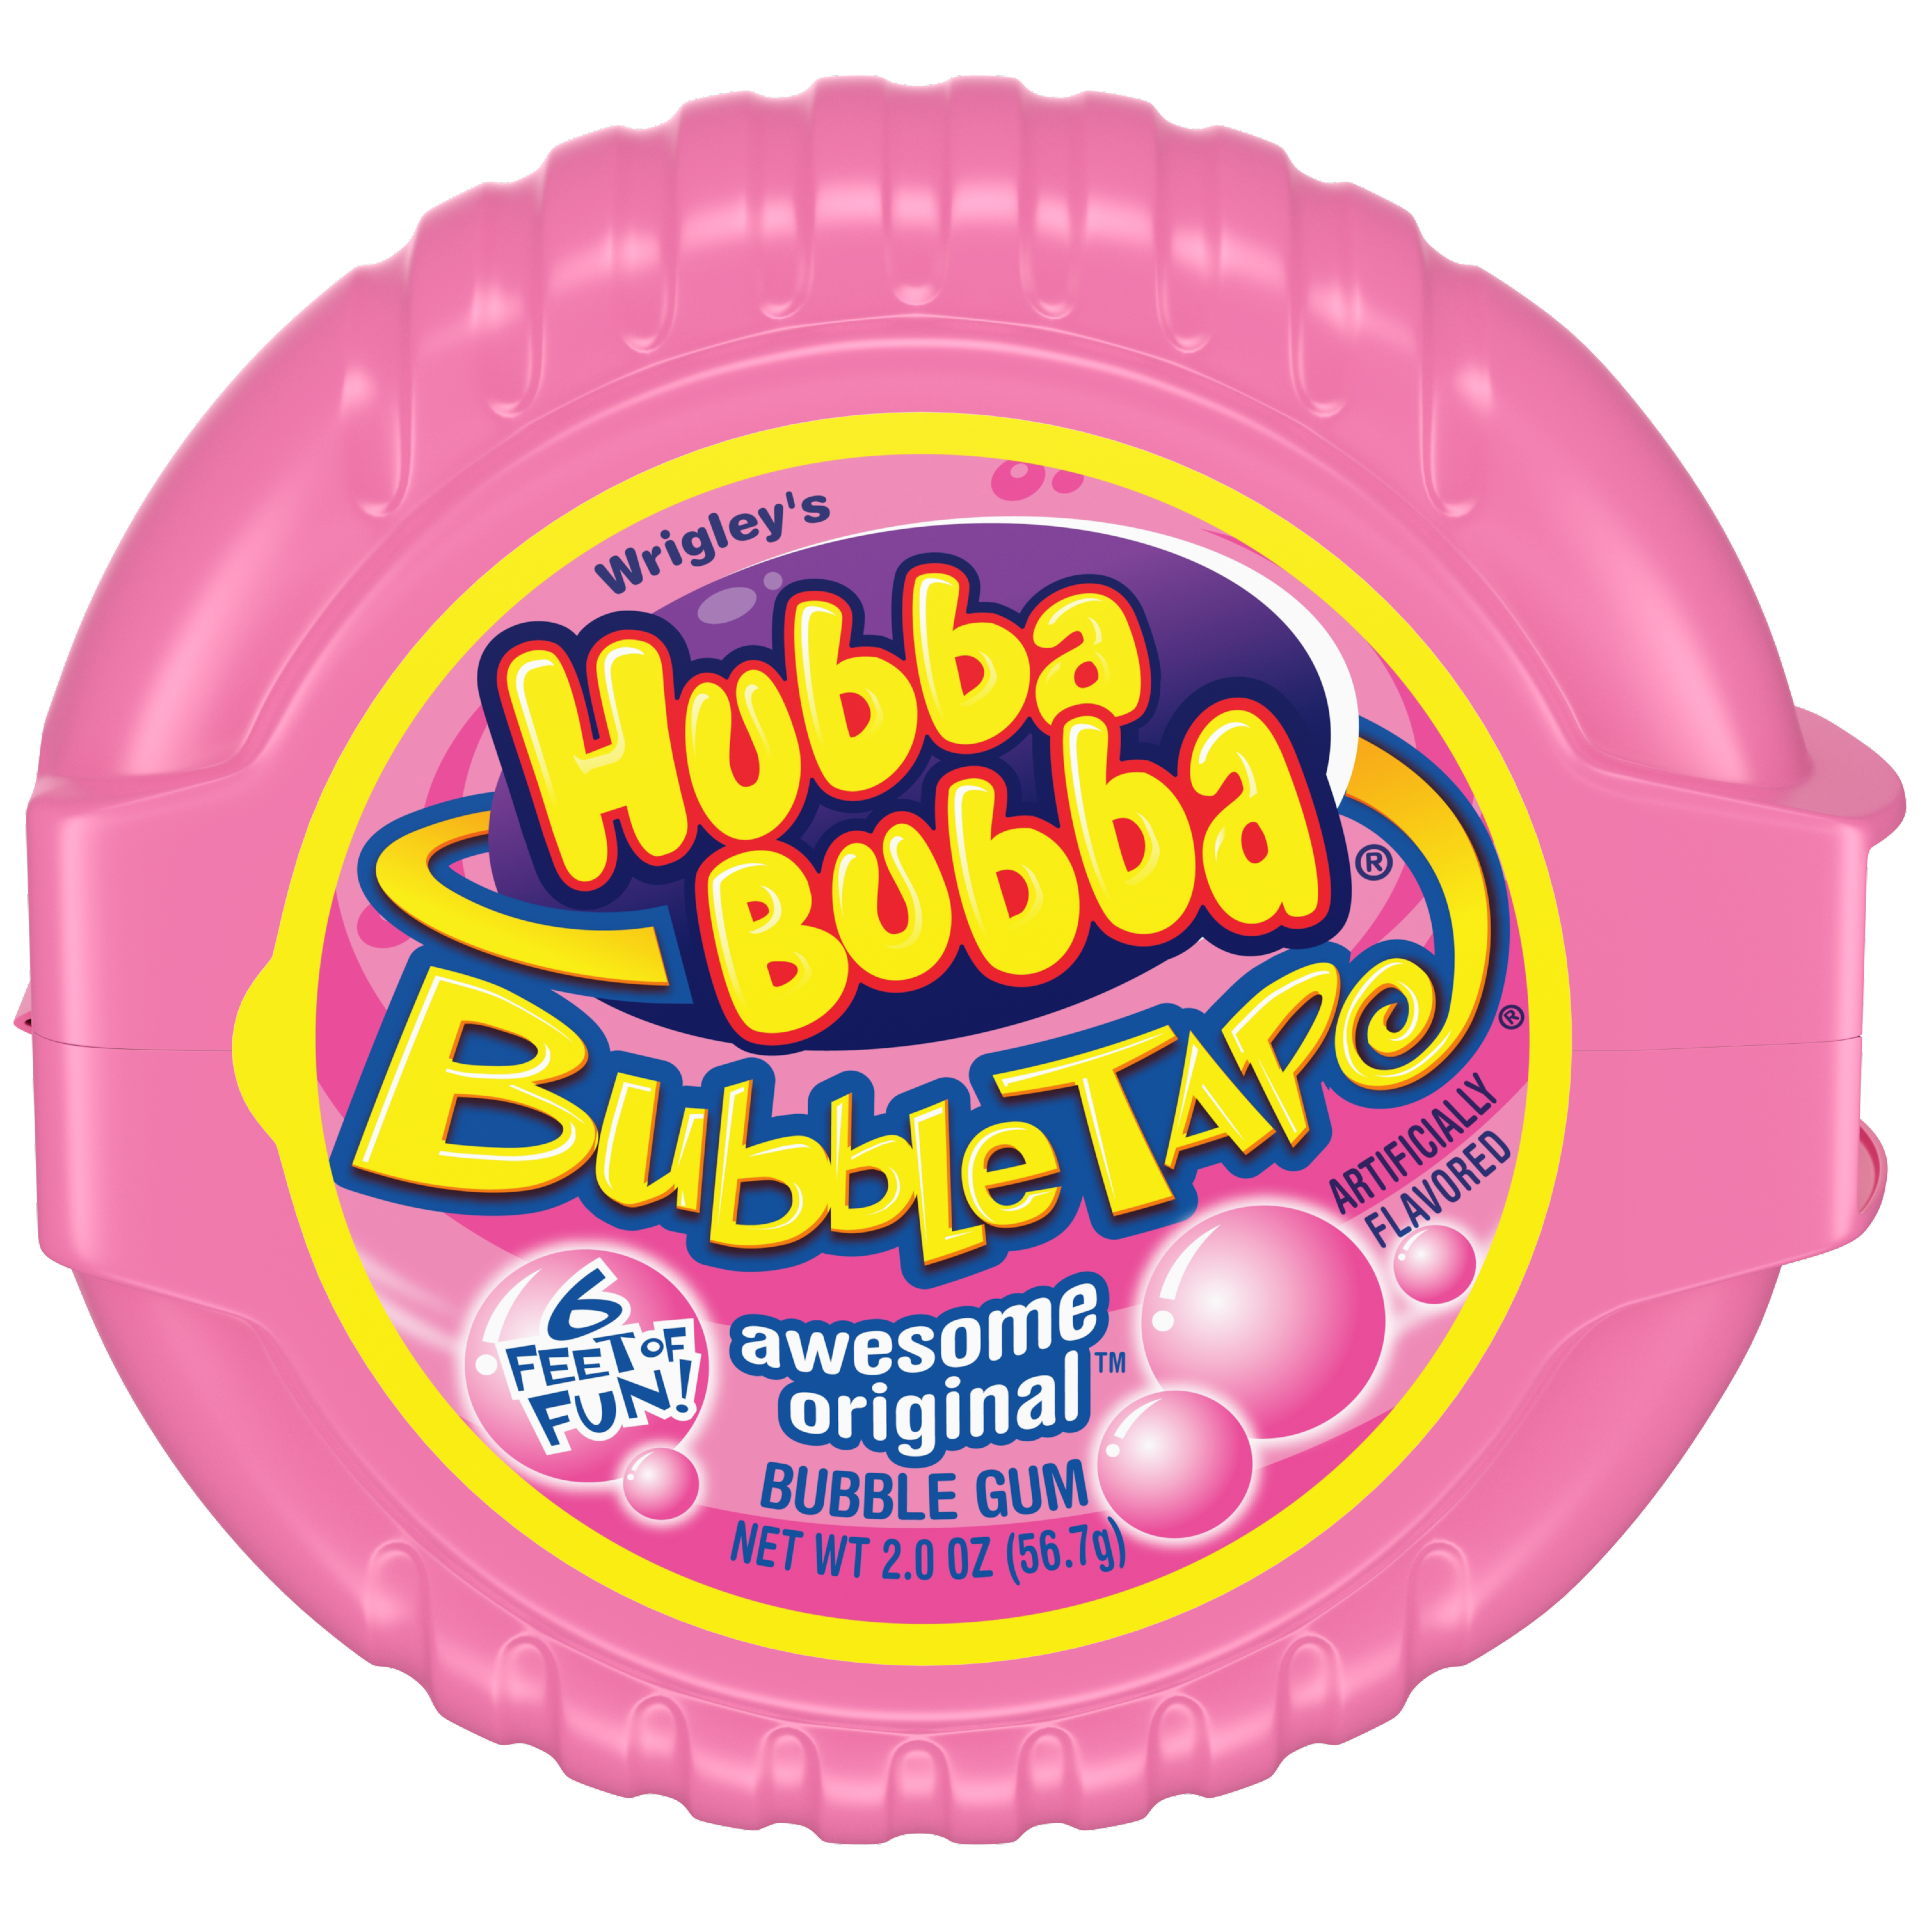 Hubba Bubba Original Bubble Tape and Sour Blue Raspberry Bundle | 6 Feet of  Gum Each 2 Flavor Pack 4 Total Ounce (Pack 4)